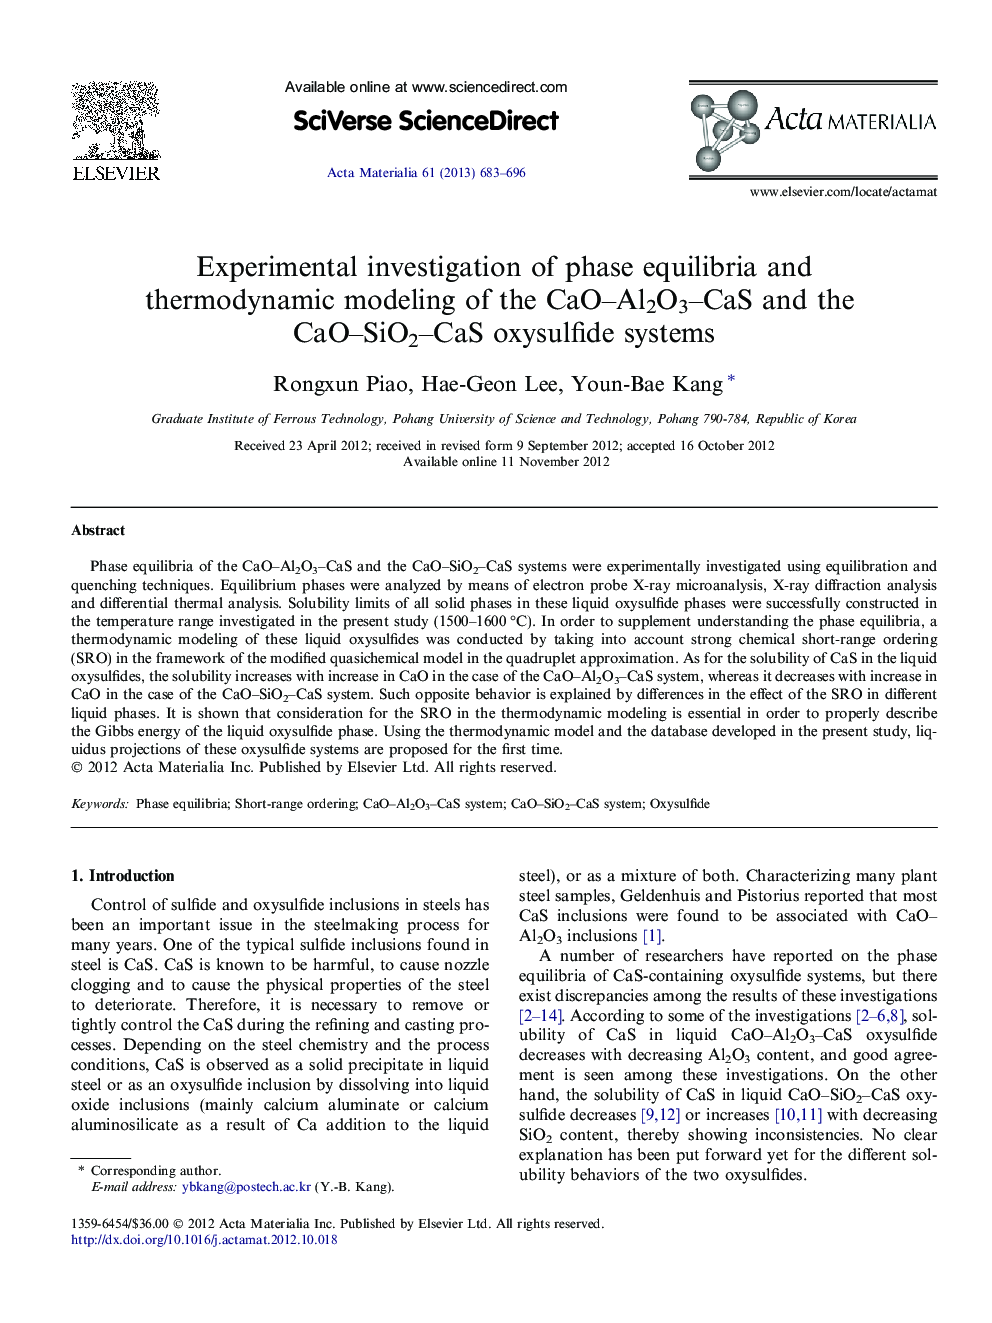 Experimental investigation of phase equilibria and thermodynamic modeling of the CaO–Al2O3–CaS and the CaO–SiO2–CaS oxysulfide systems